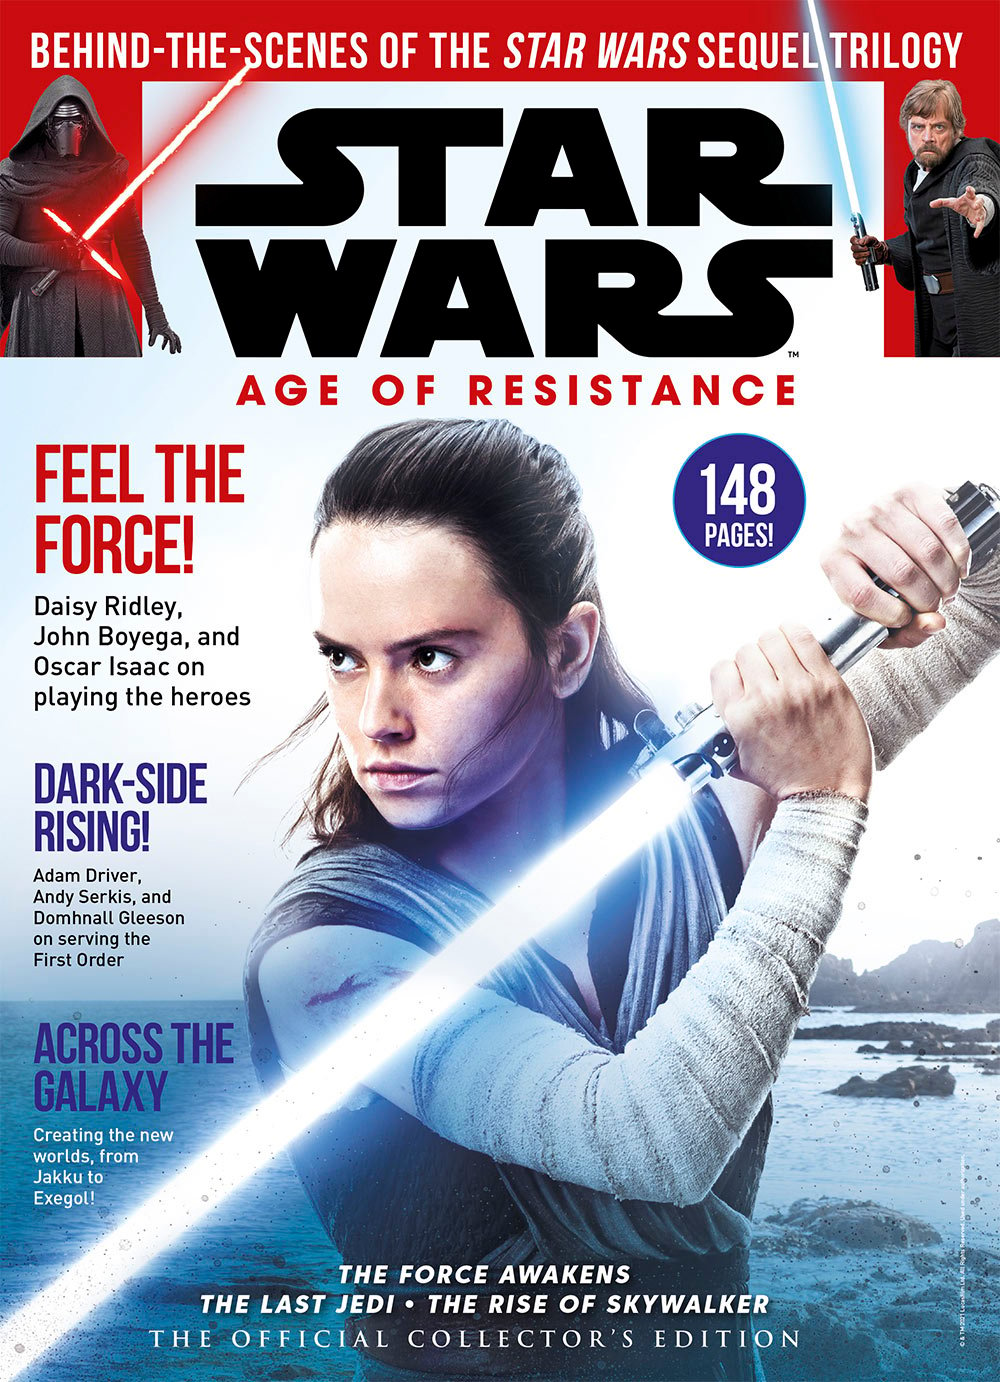 Star Wars: The Age of Resistance - The Official Collector's Edition Cover